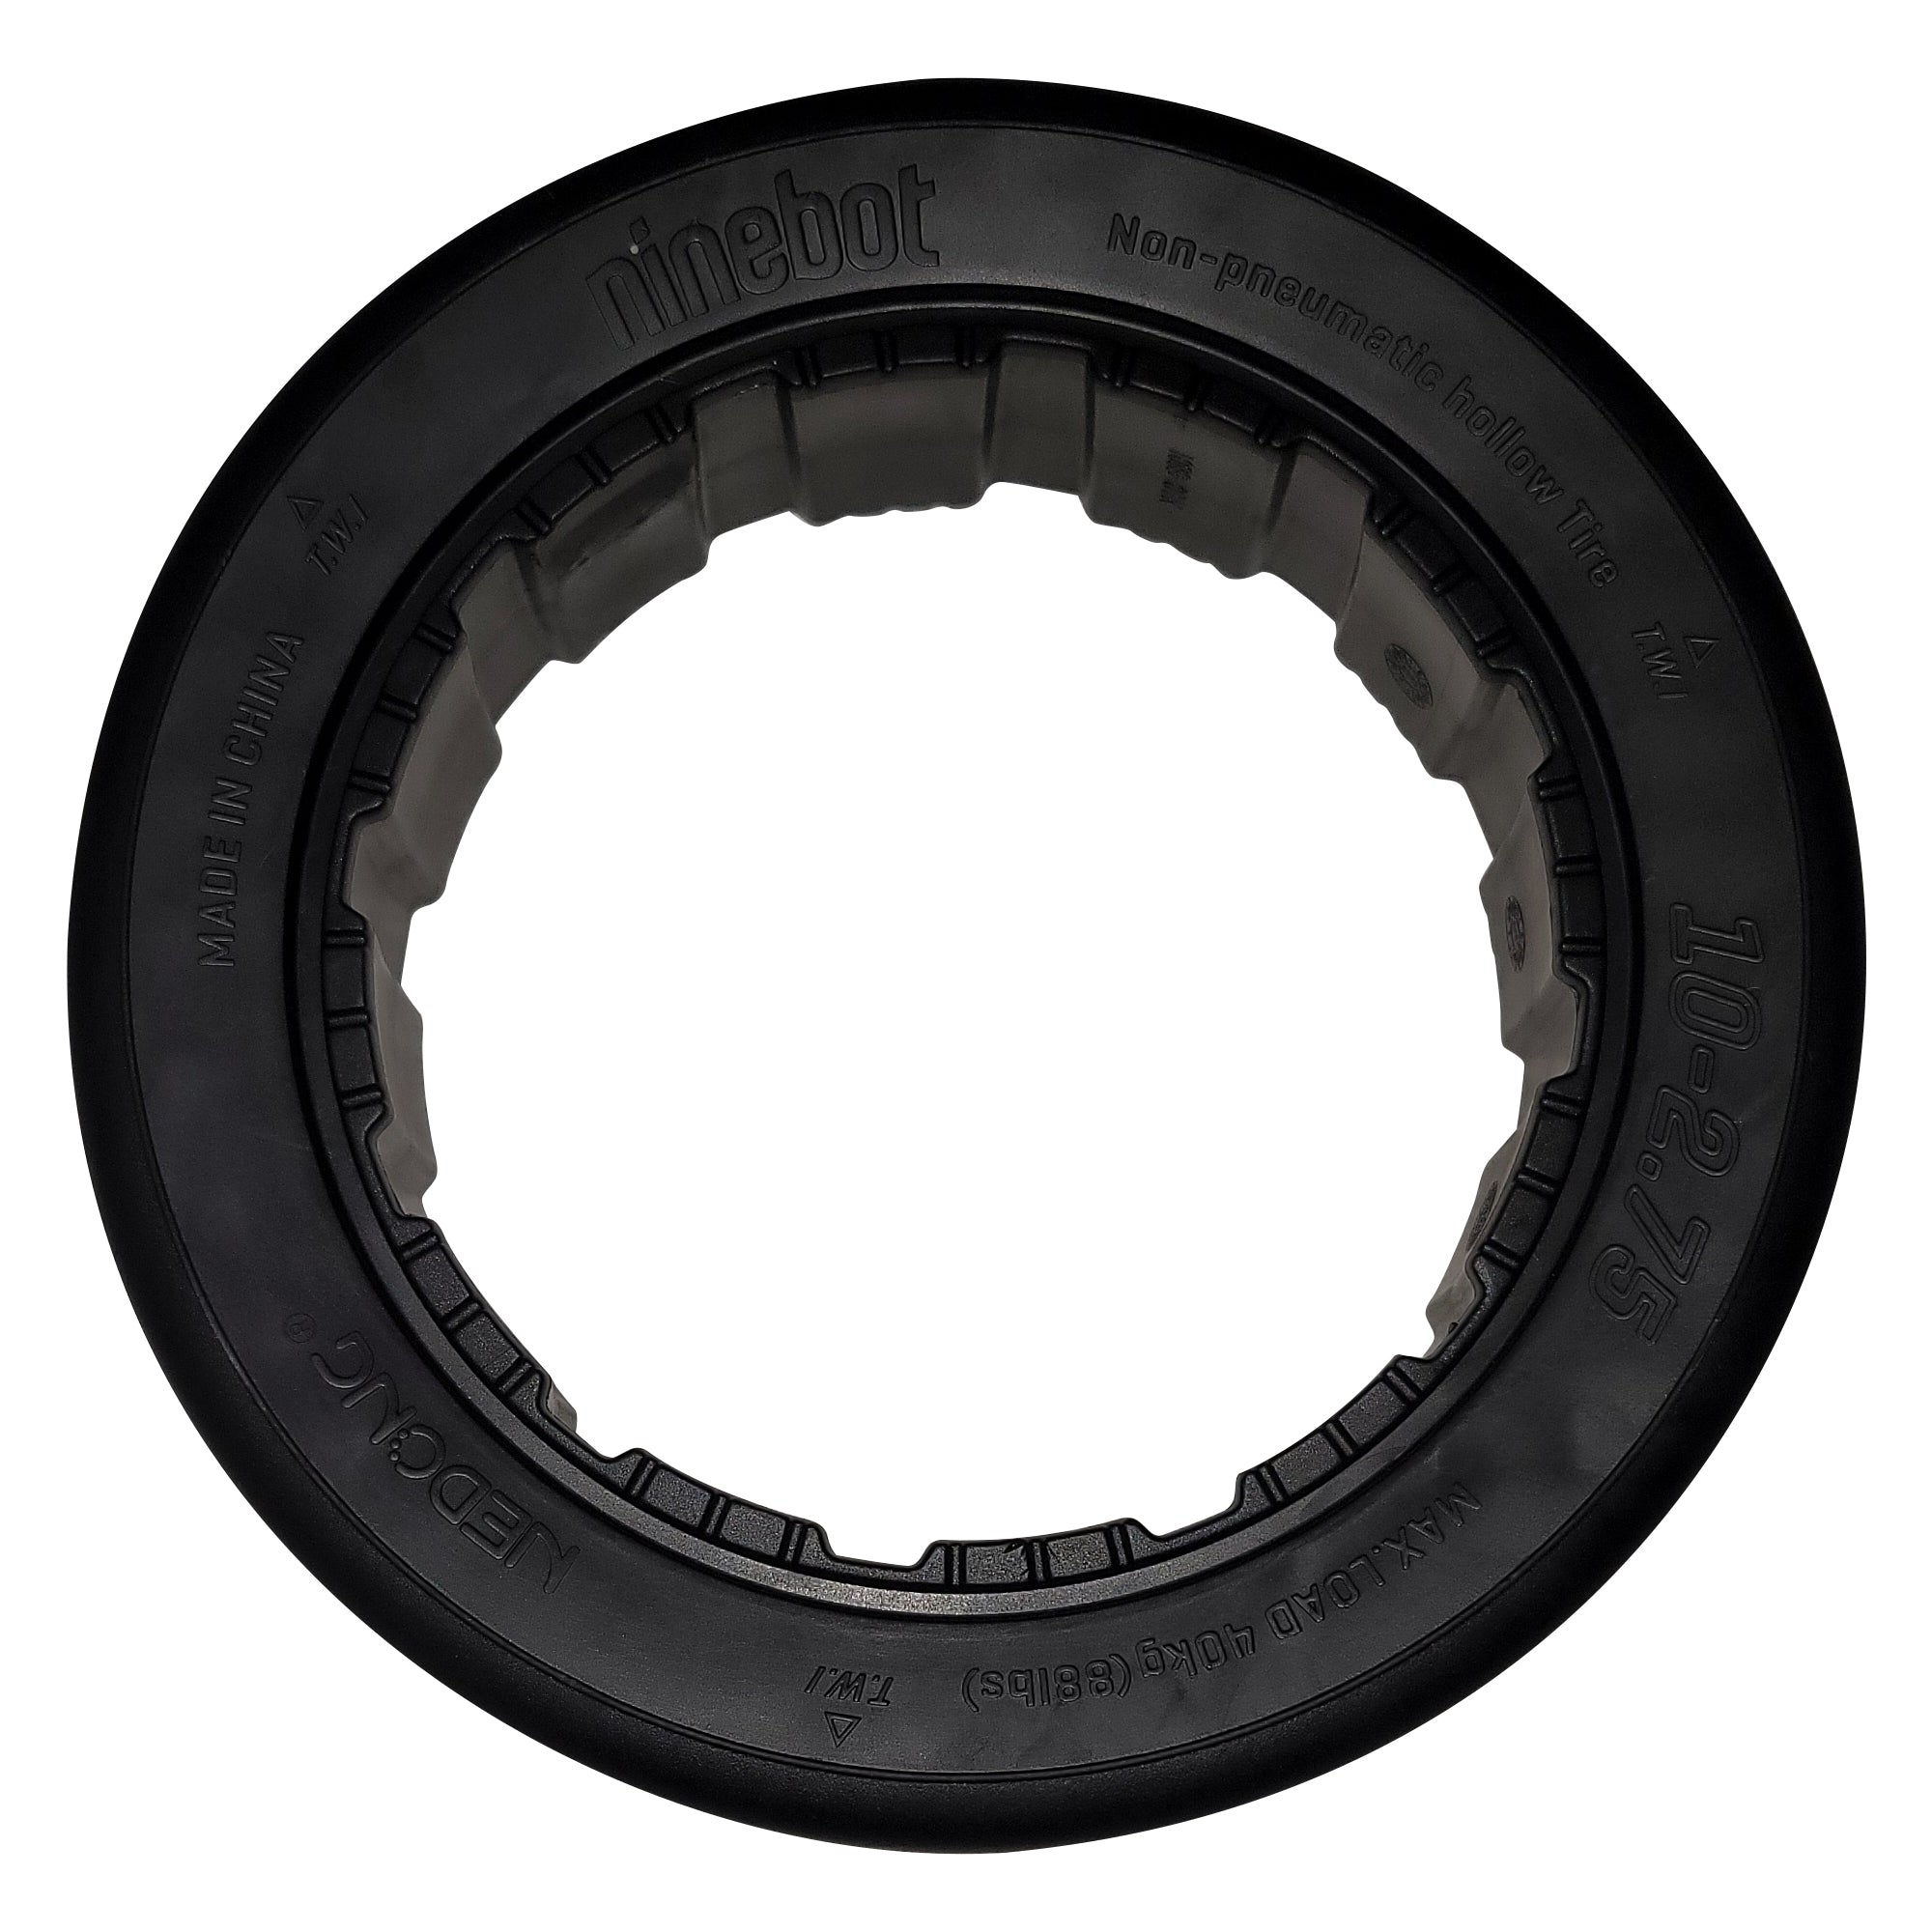 Rear Drift Tires For Ninebot S Max And Gokart